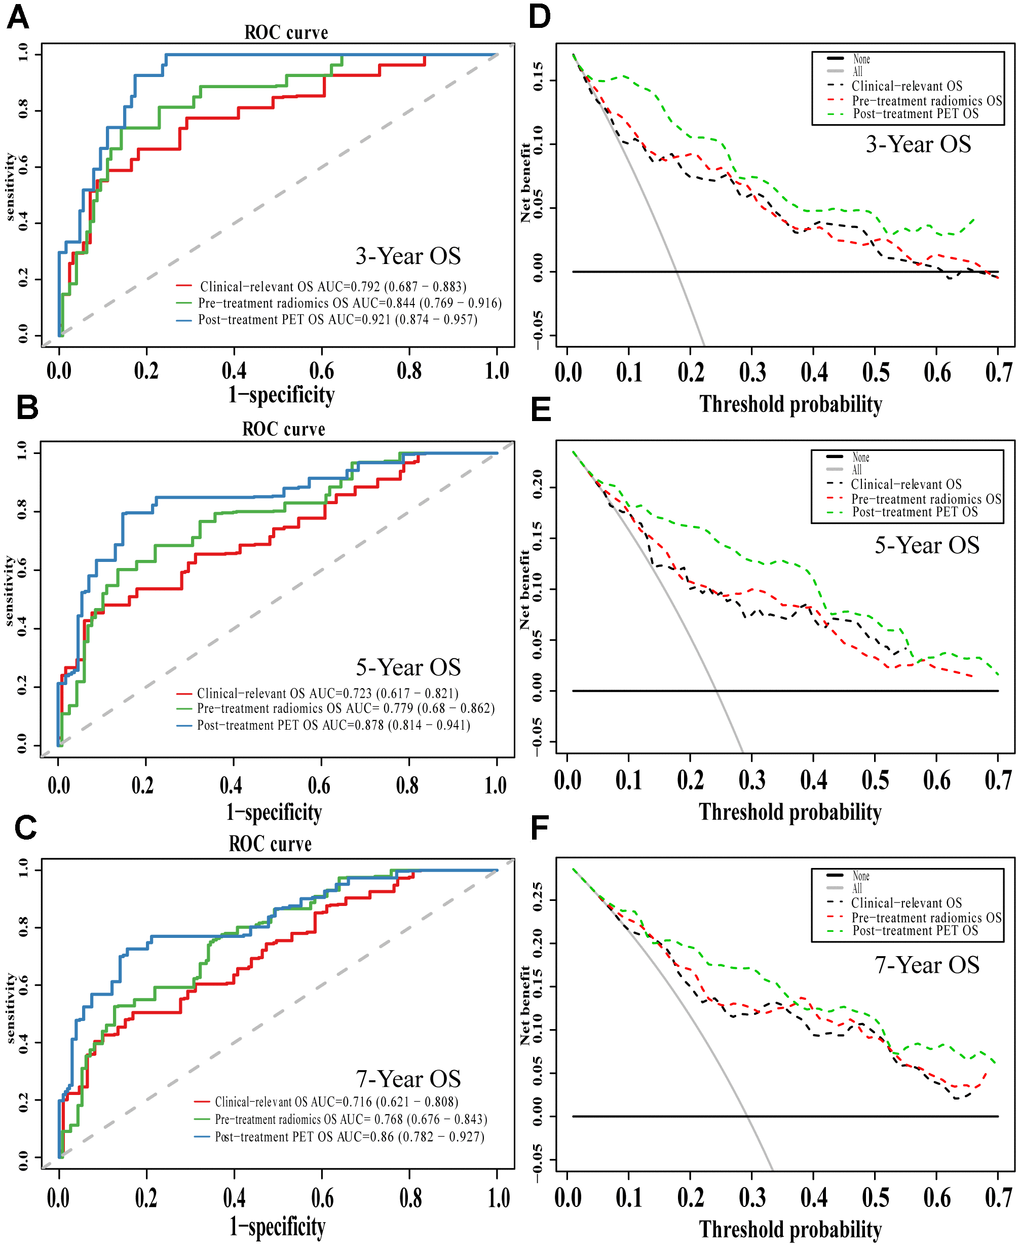 The evaluation of built OS nomograms. The ROC curves and DCA curves of the comparison between clinical-relevant, pre-treatment and post-treatment survival OS models in 3, 5, and 7 years. The ROC curves of 3-year survival (A), 5-year survival (B) and 7-year survival (C). The DCA curves of 3-year survival (D), 5-year survival (E) and 7-year survival (F). Abbreviations: OS: overall survival. ROC: receiver operator curve. DCA: decision curve analysis.